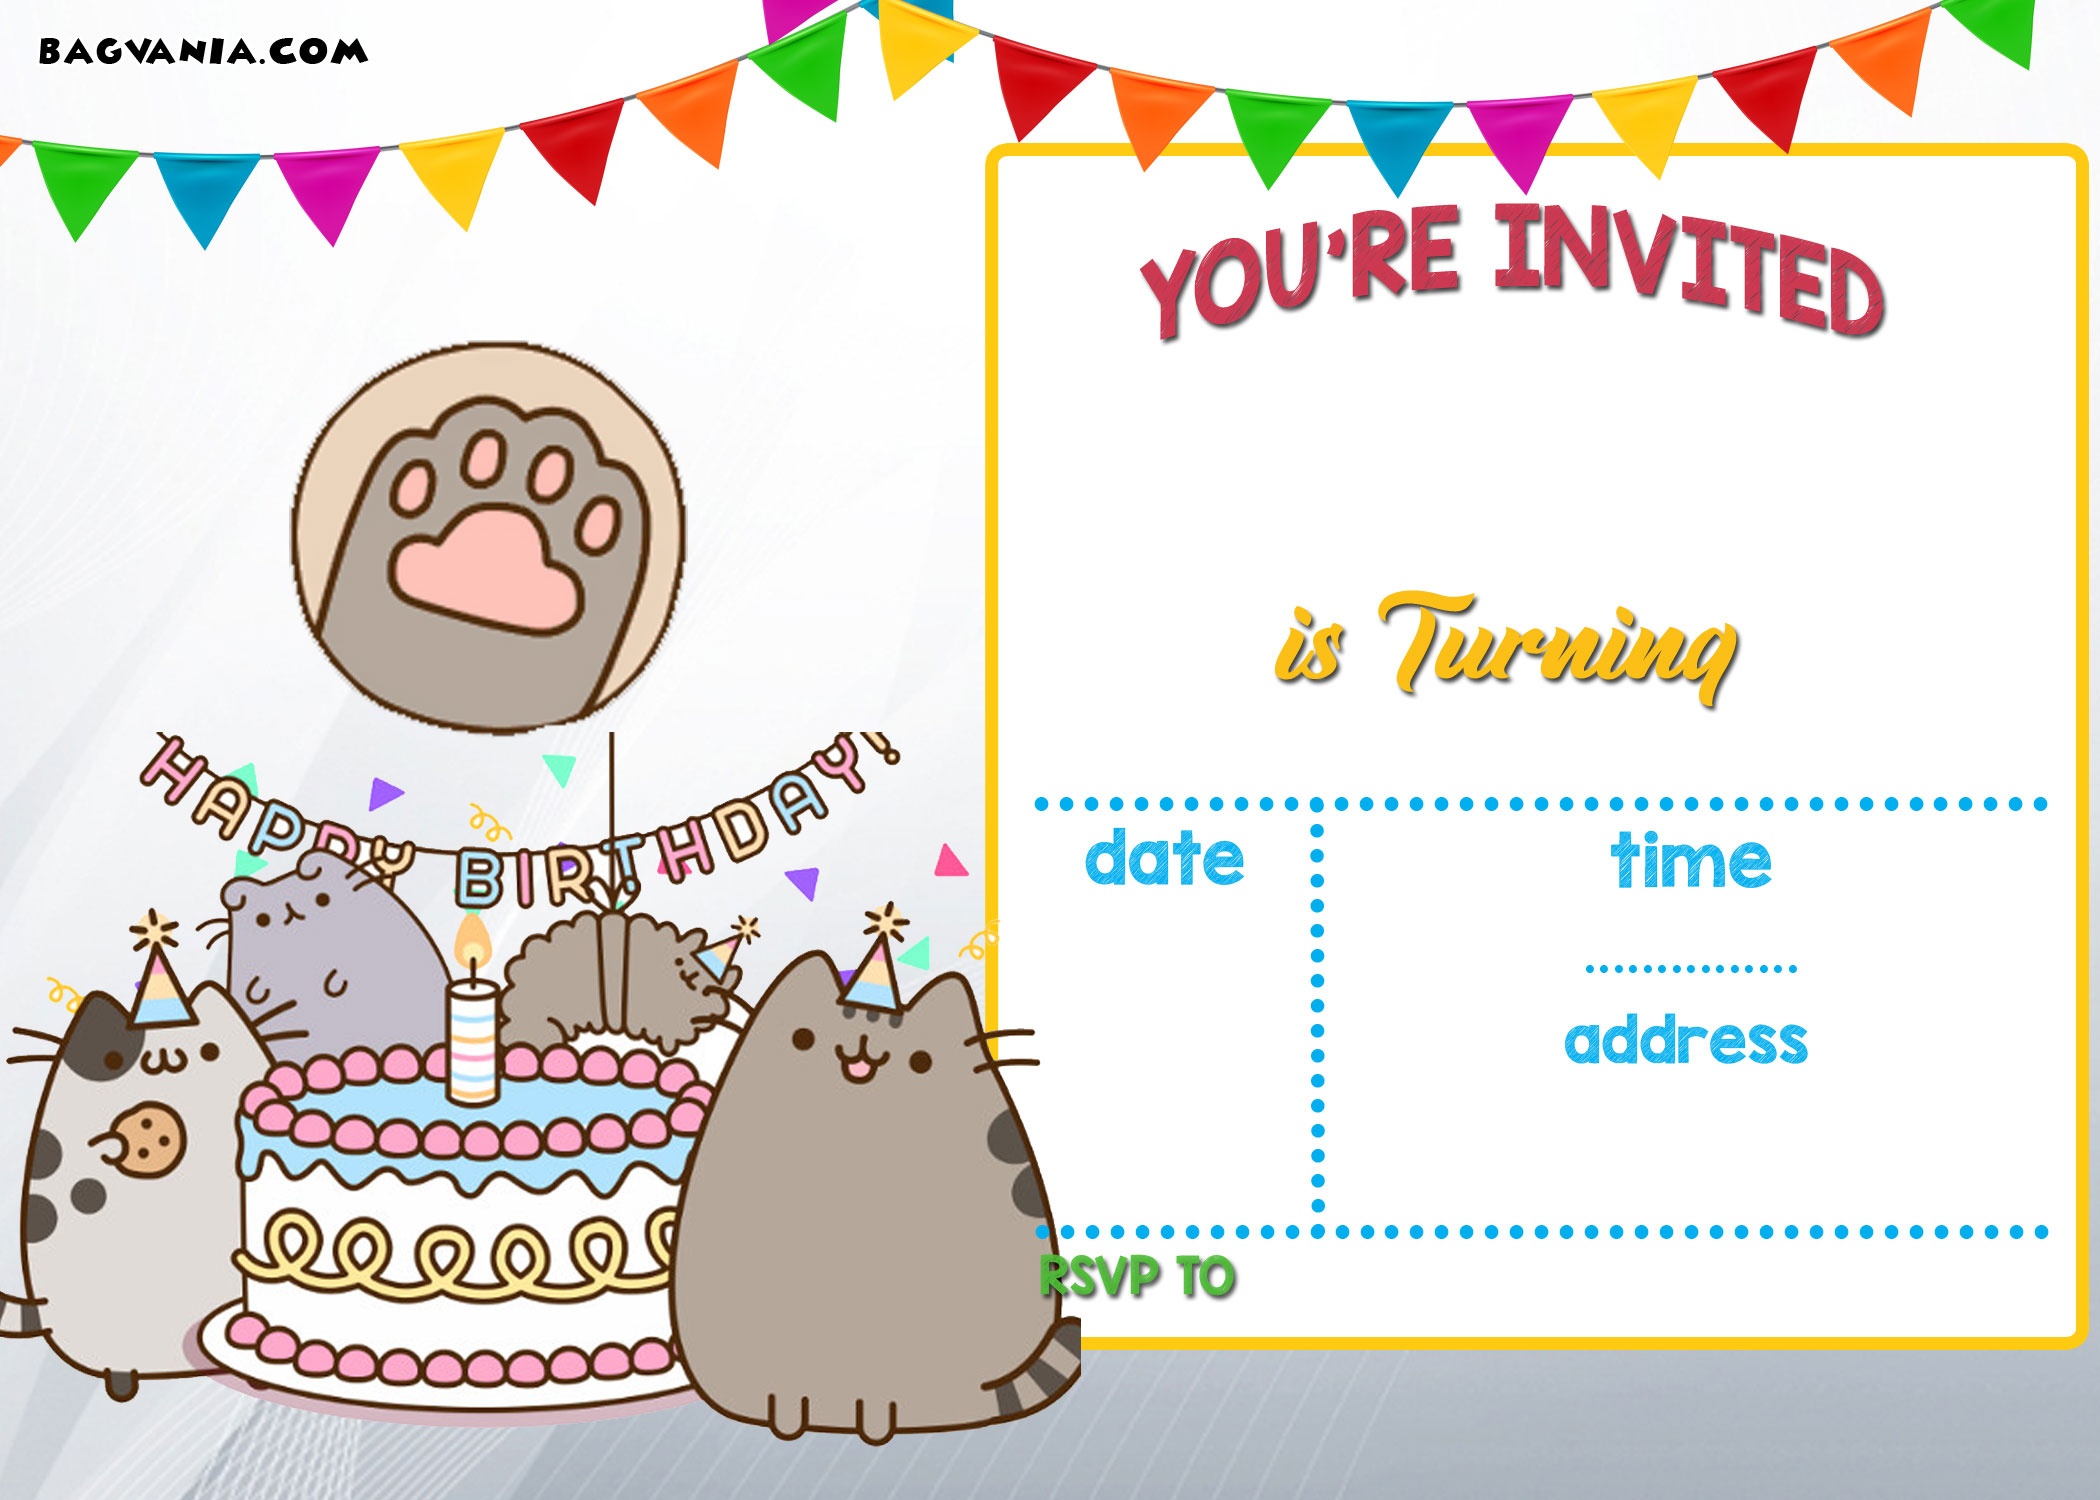 Printable Birthday Party Invitations For Free - Party Invitation - Free Printable Birthday Invitations For Him